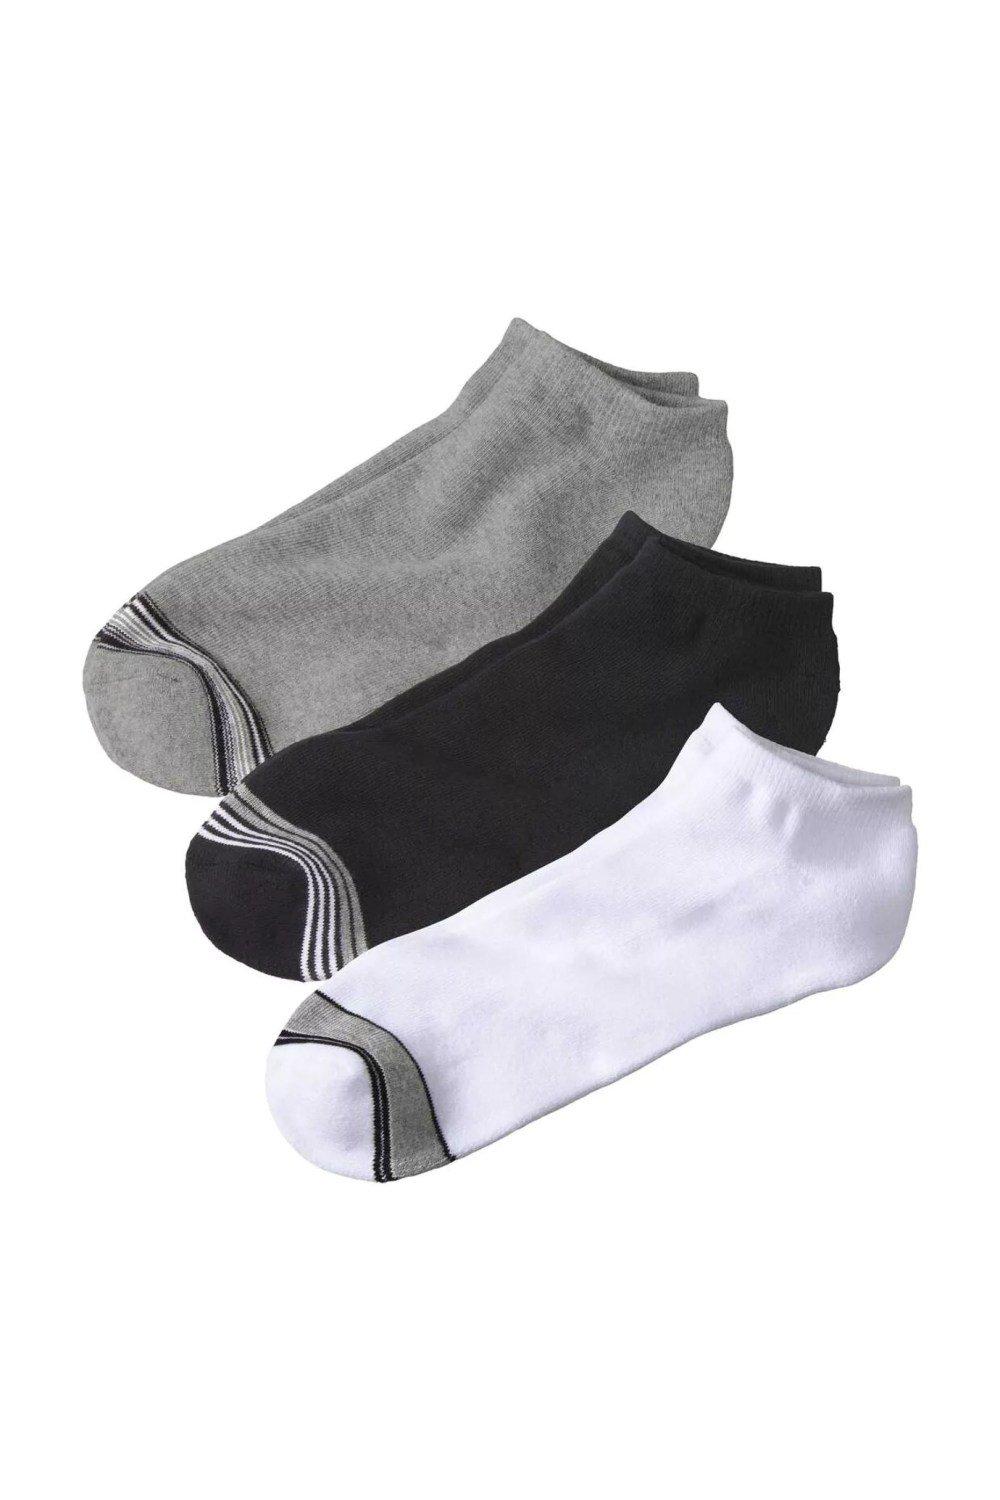 Contrast Striped Trainer Socks (Pack of 3)